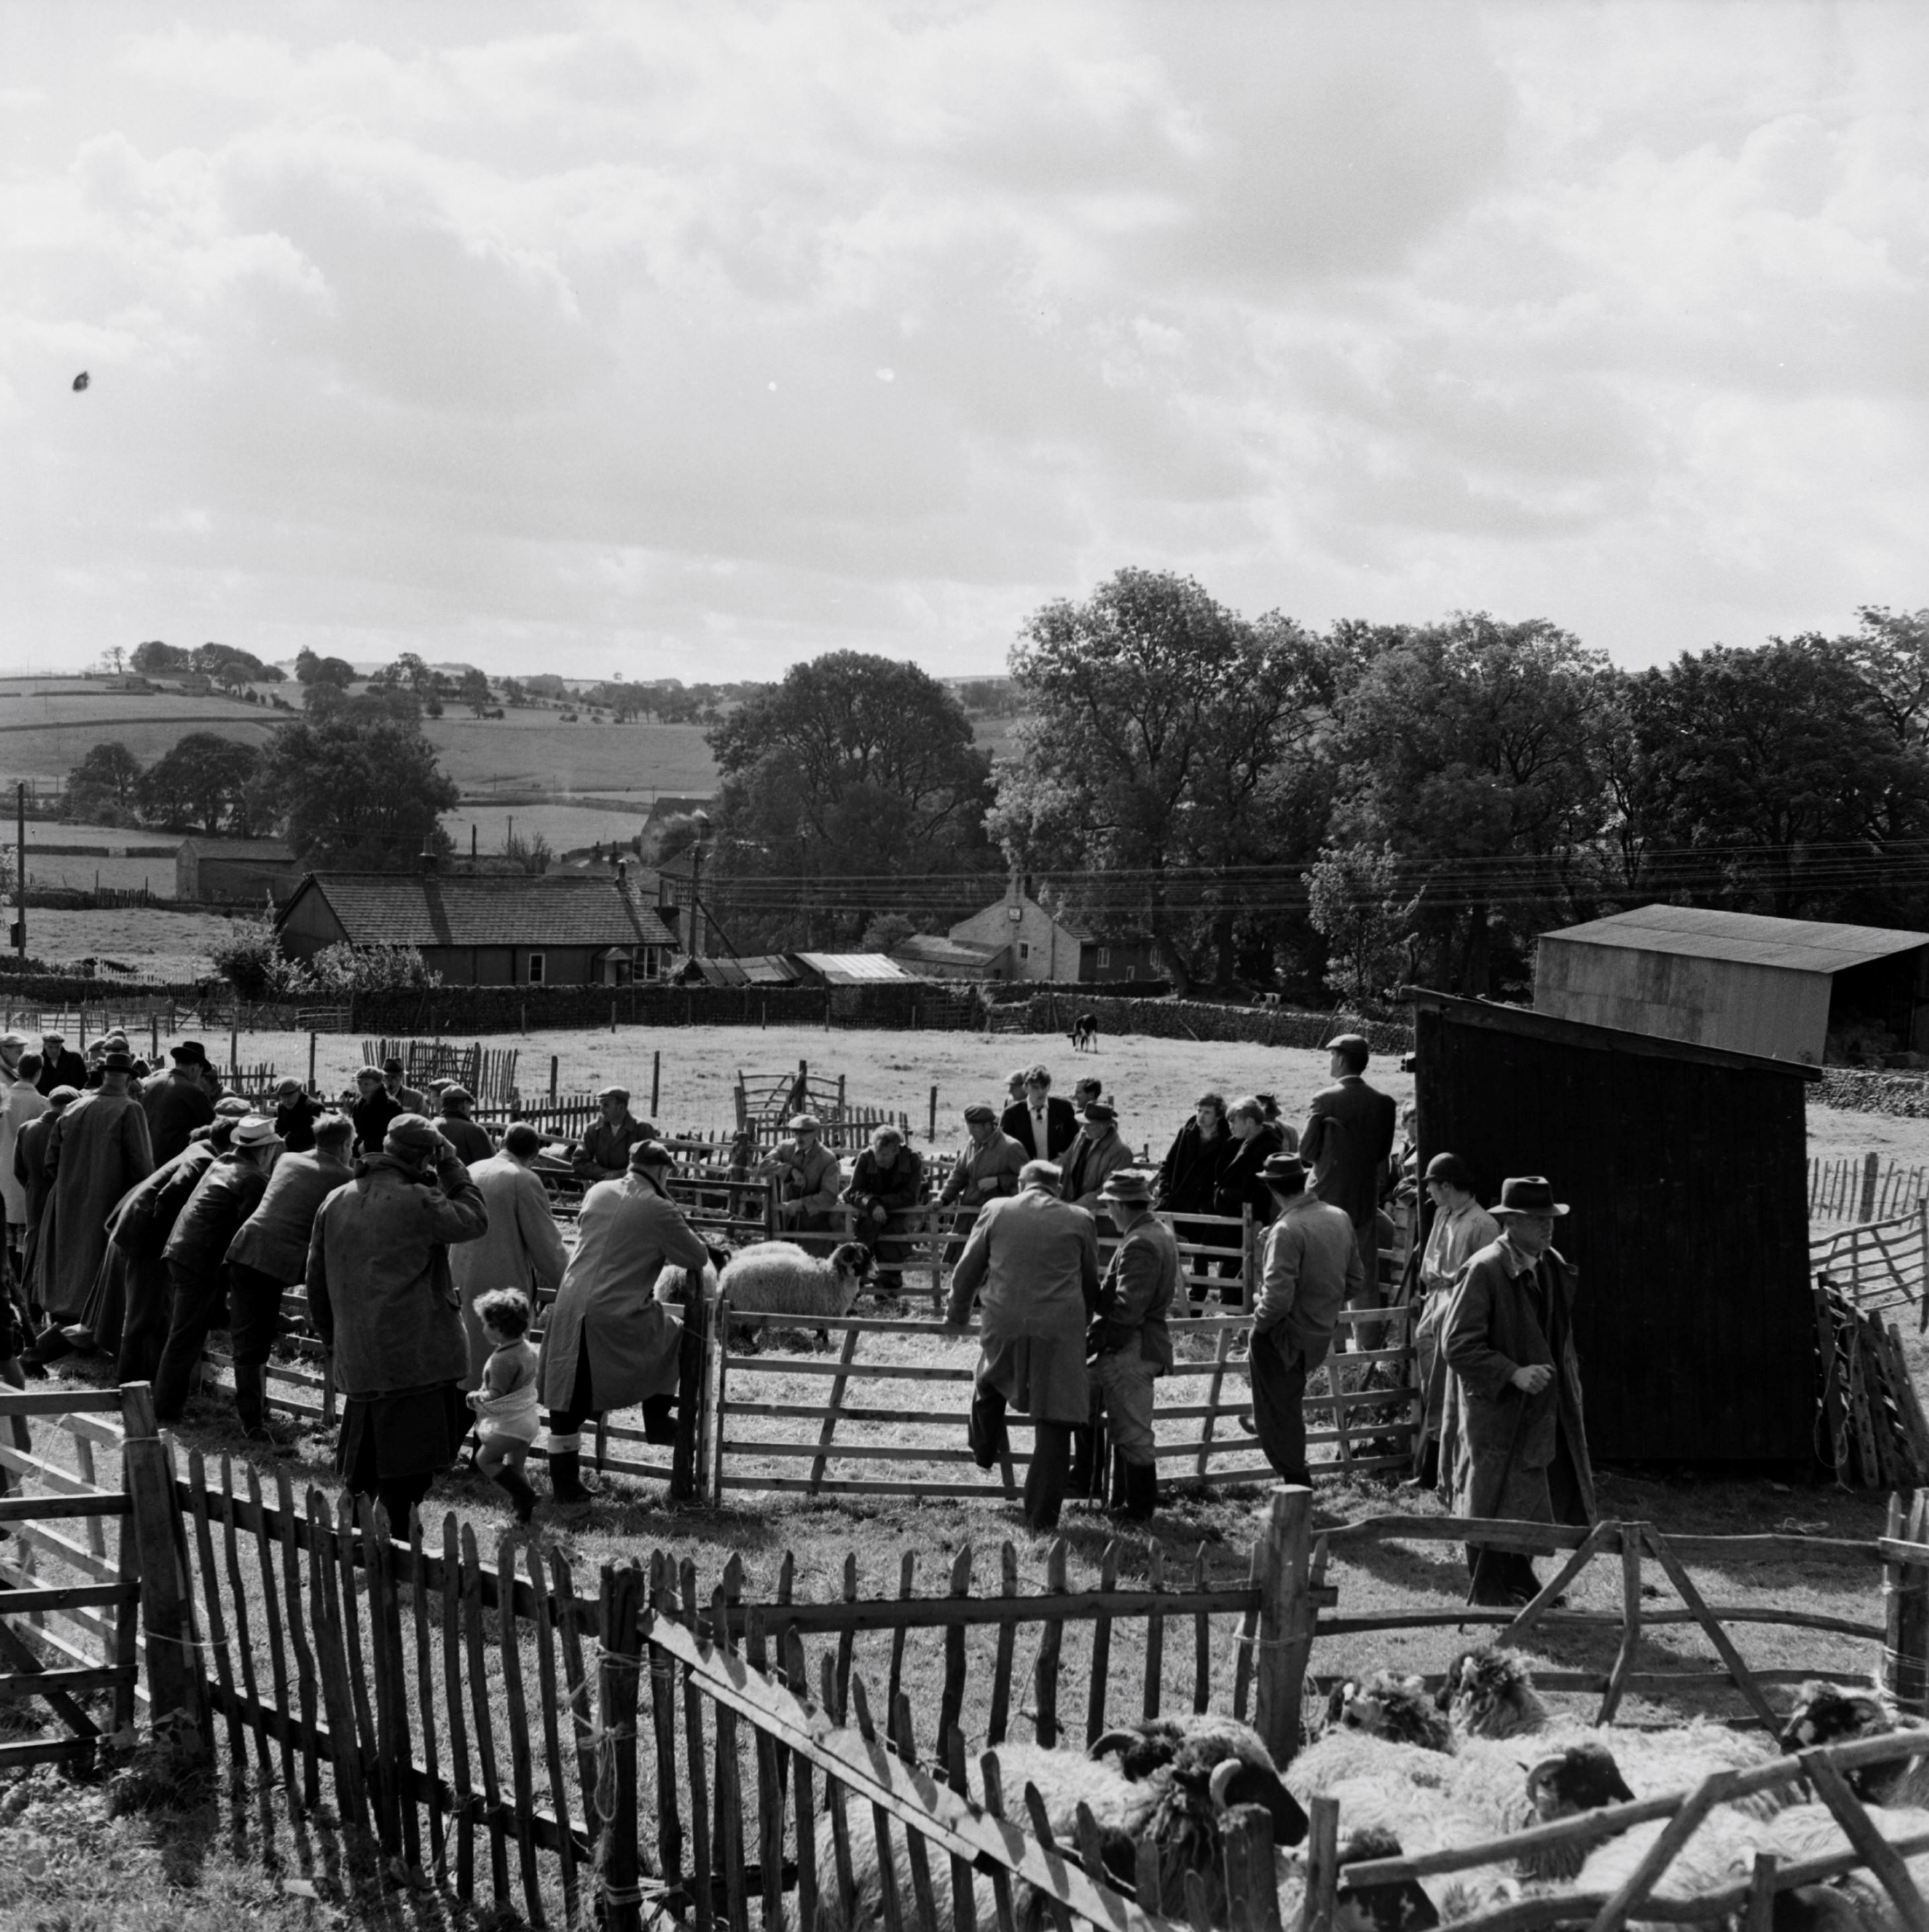 The Malham Sheep Sale is traditionally held on the Saturday of the August Bank Holiday as part of the Malham Show. This photograph is from 1964.